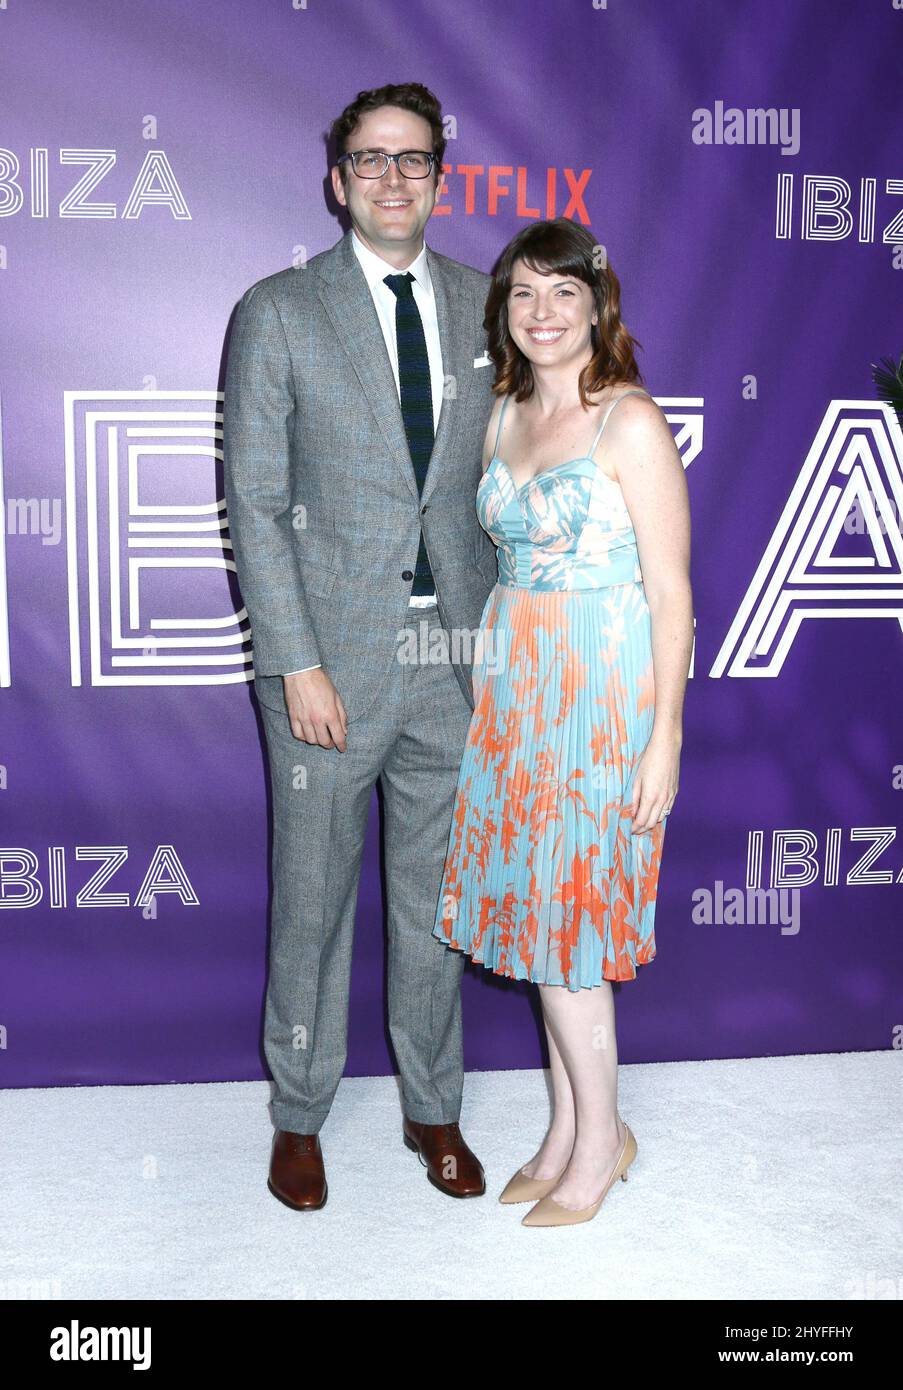 Humphrey Ker & wife Megan Ganz attending Netflix's 'Ibiza' premiere Held at the AMC Loews Lincoln Square on May 21, 2018 Stock Photo